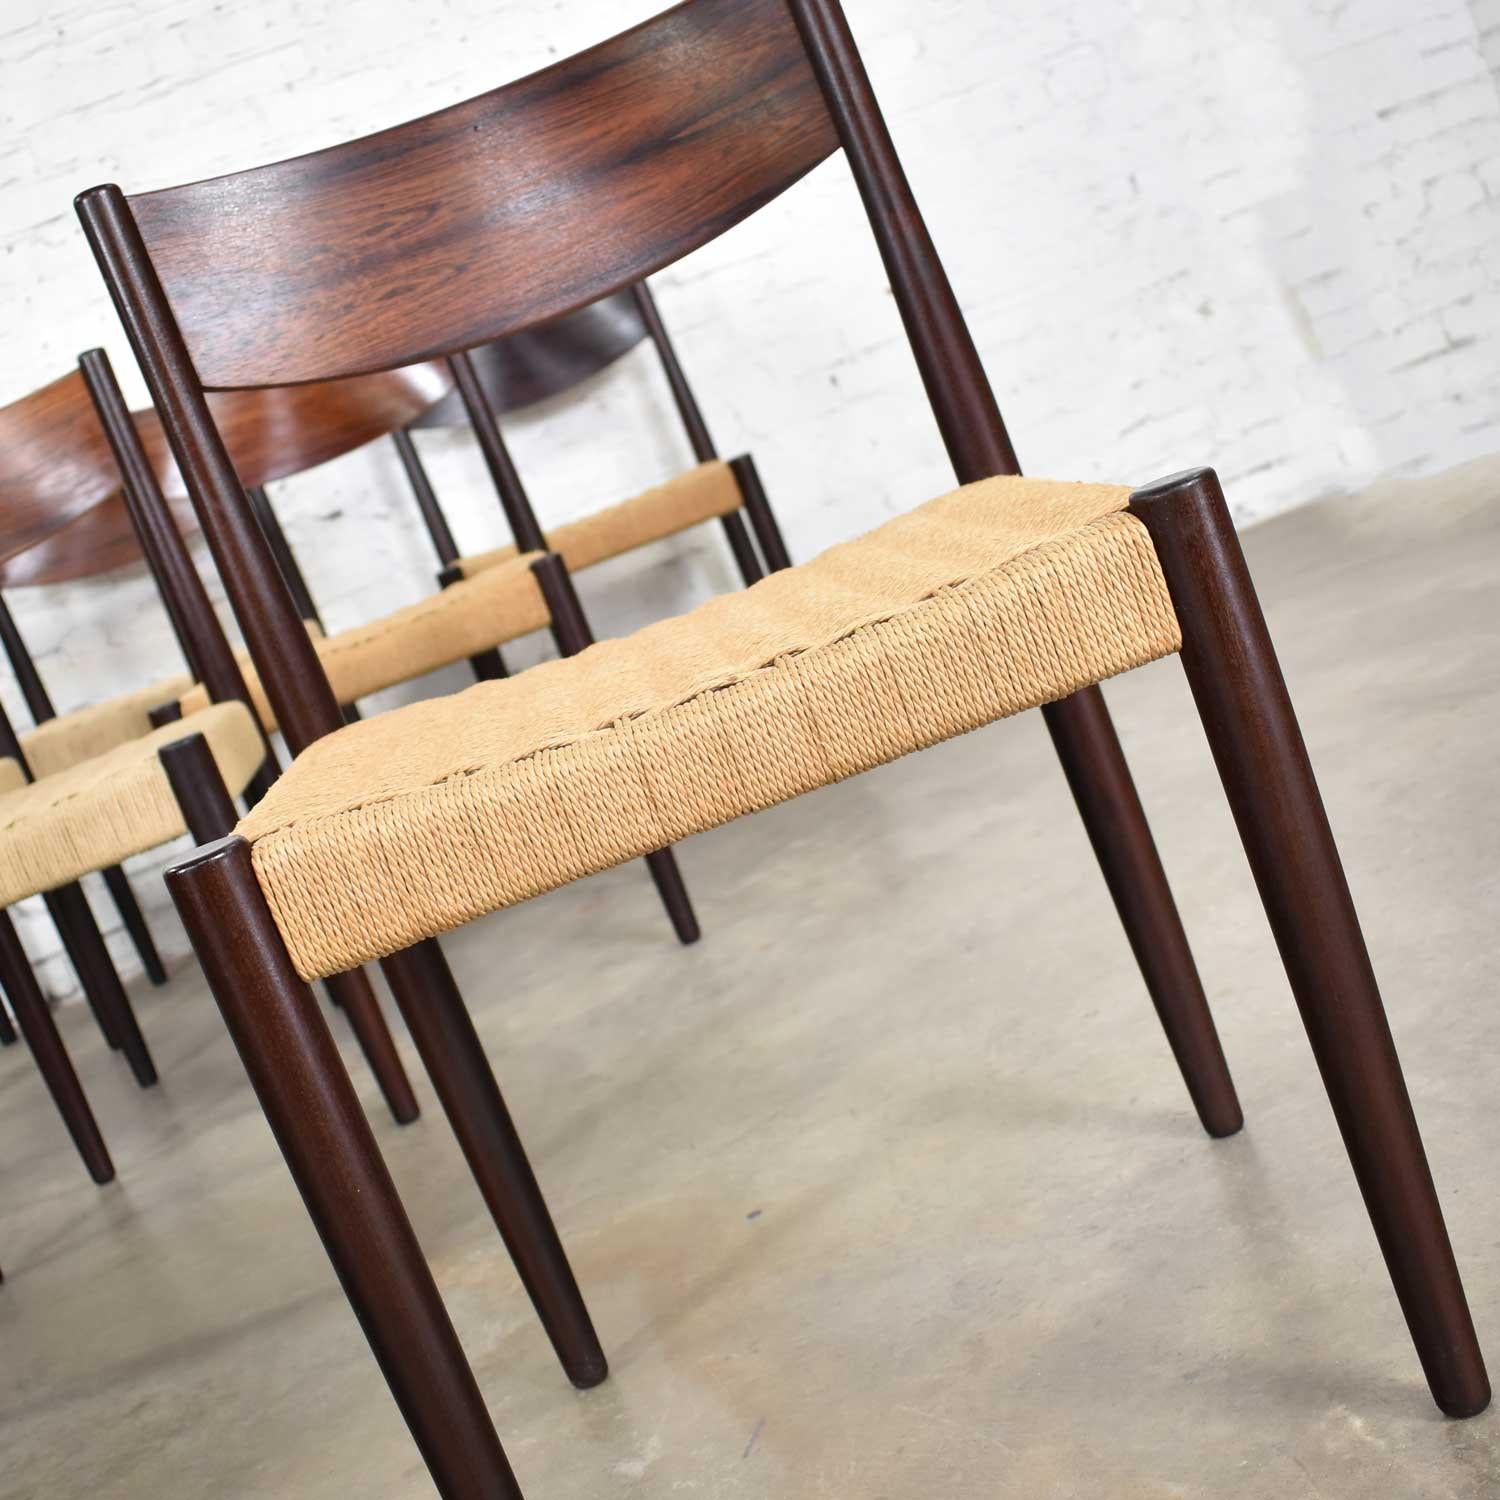 Poul Volther Scandinavian Modern Rosewood Paper Cord Dining Chairs by Frem Røjle 6